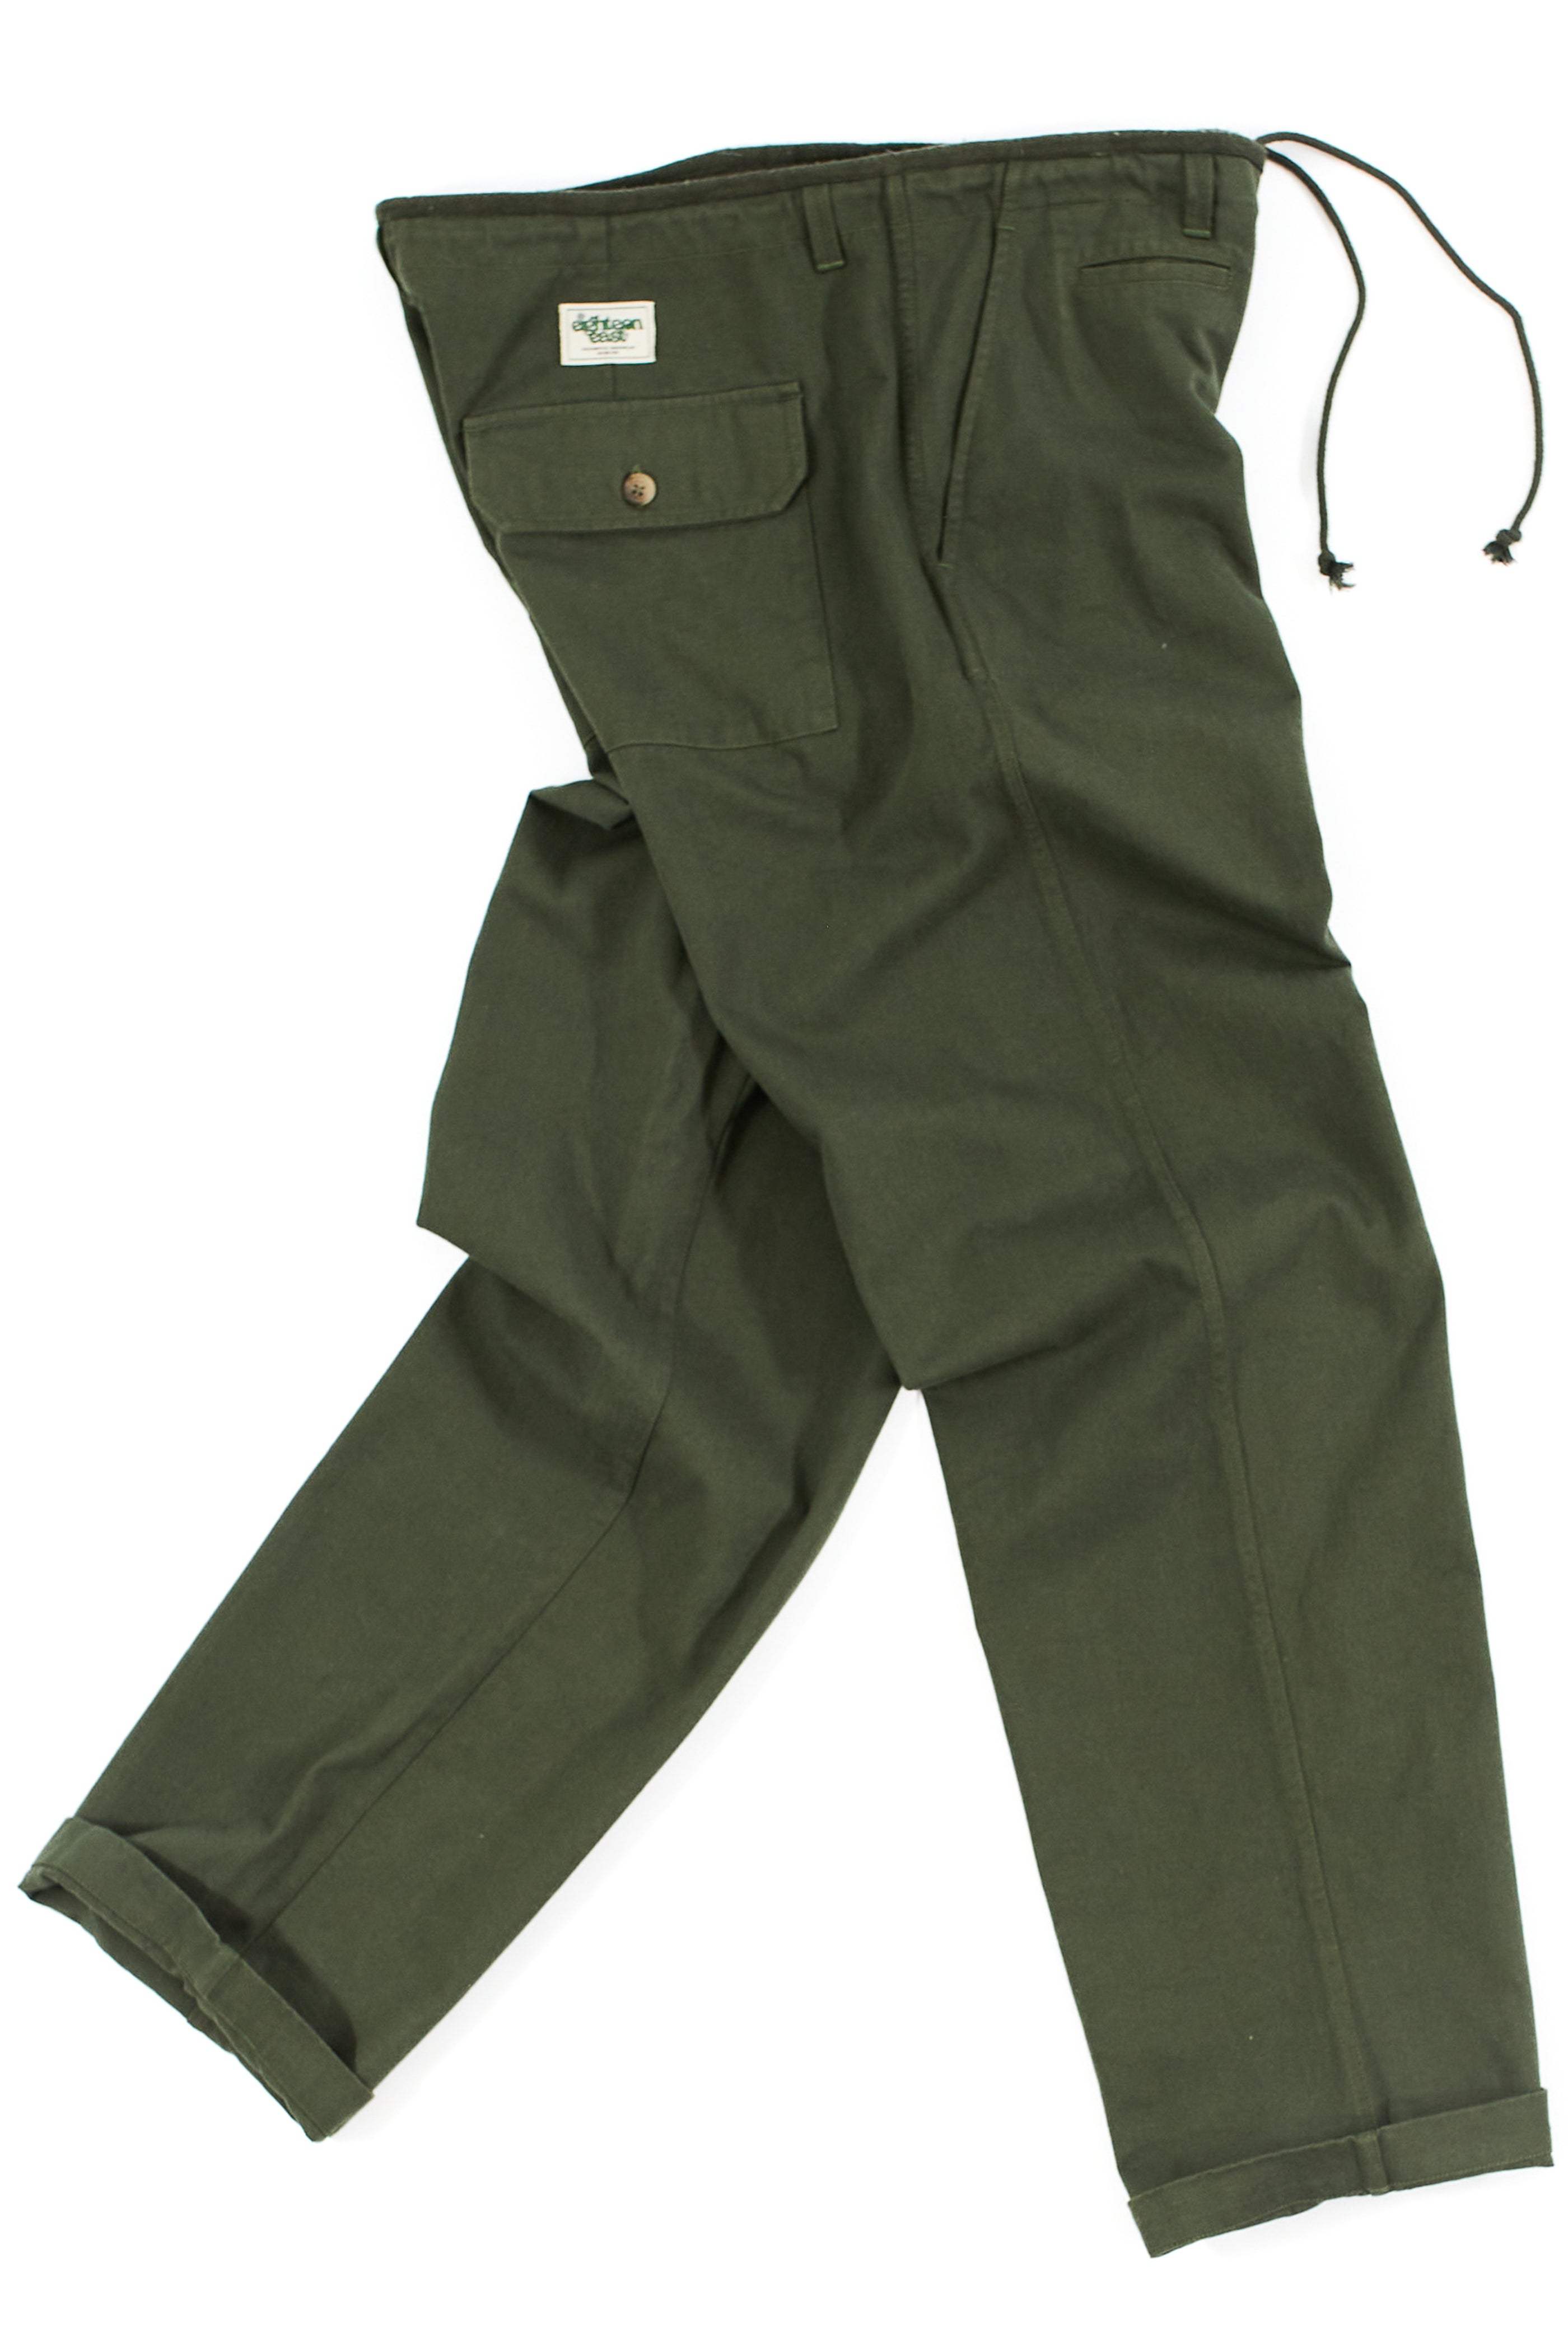 SHELTER PANT - CILANTRO HOMEGROWN TWILL